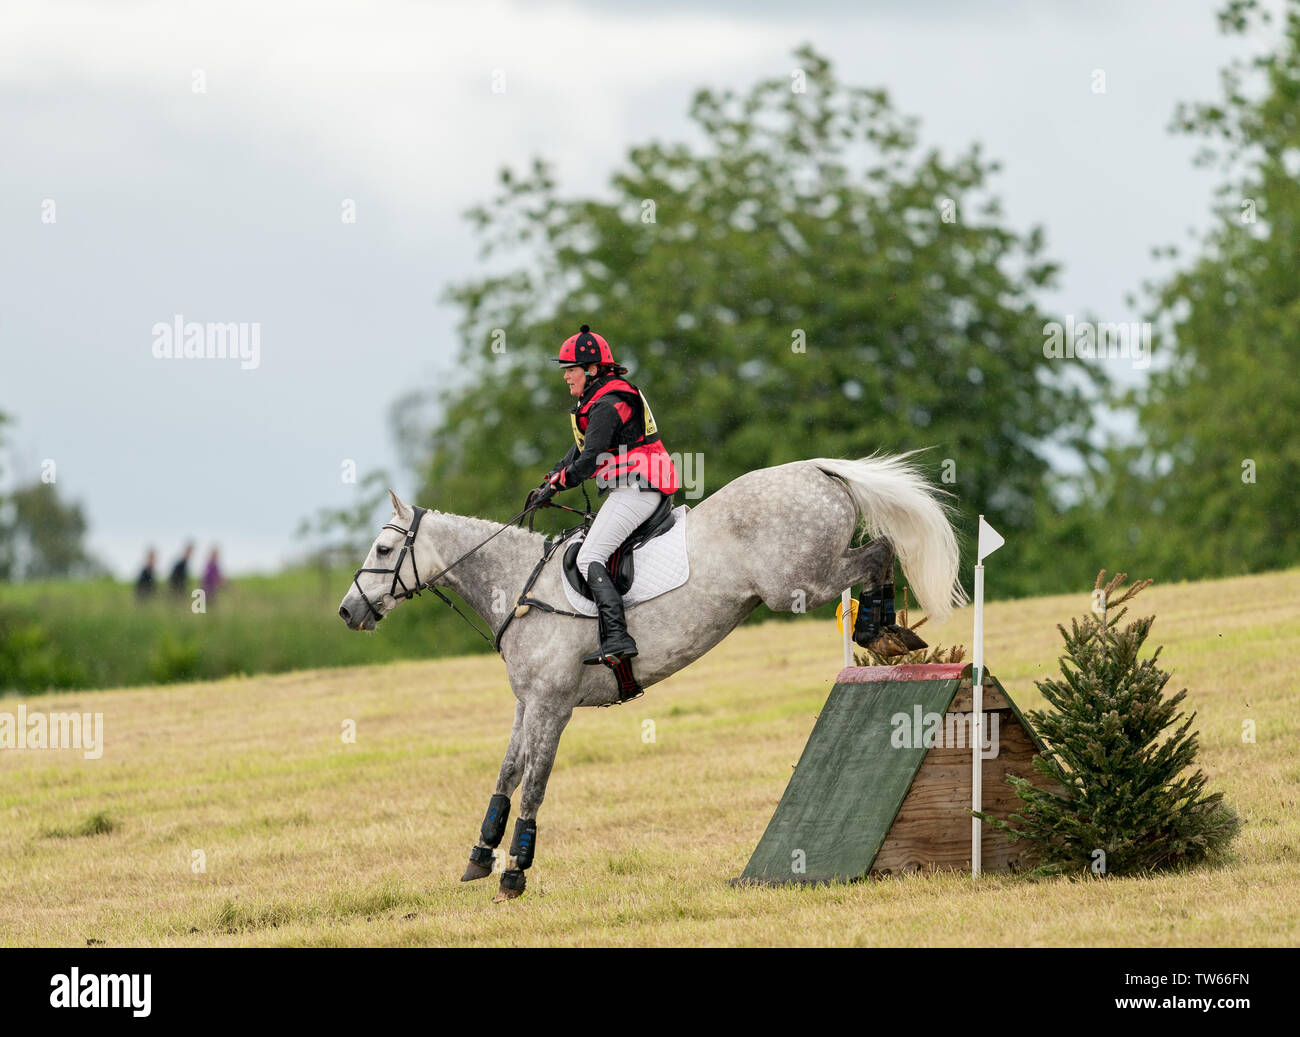 16 June 2019, Burgie House, Forres, Moray, Scotland, UK. This is a participant within the British Eventing Affiliated Event, Burgie Horse Trails. Stock Photo